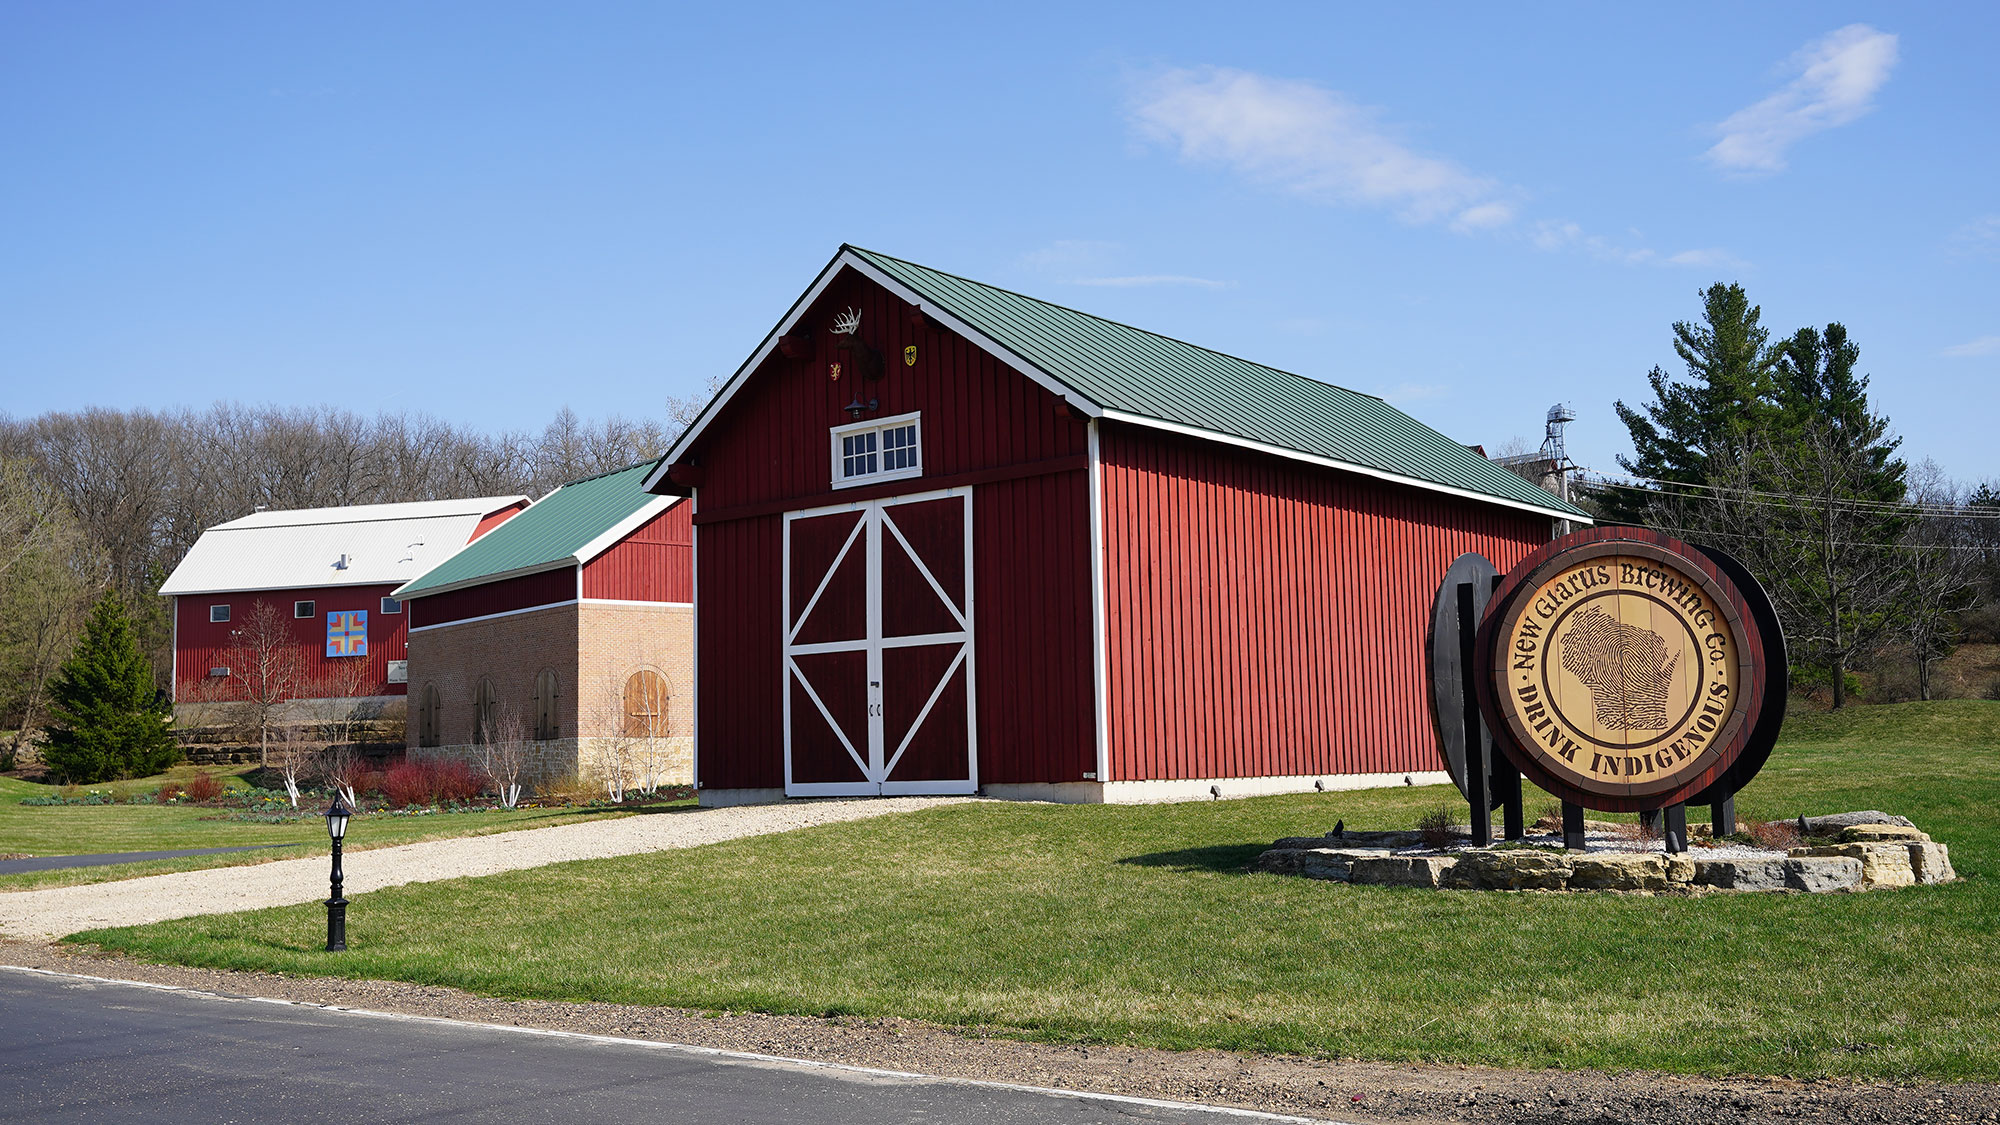 Lawsuit Alleging Misconduct by New Glarus Brewing Co. Has Been Dismissed